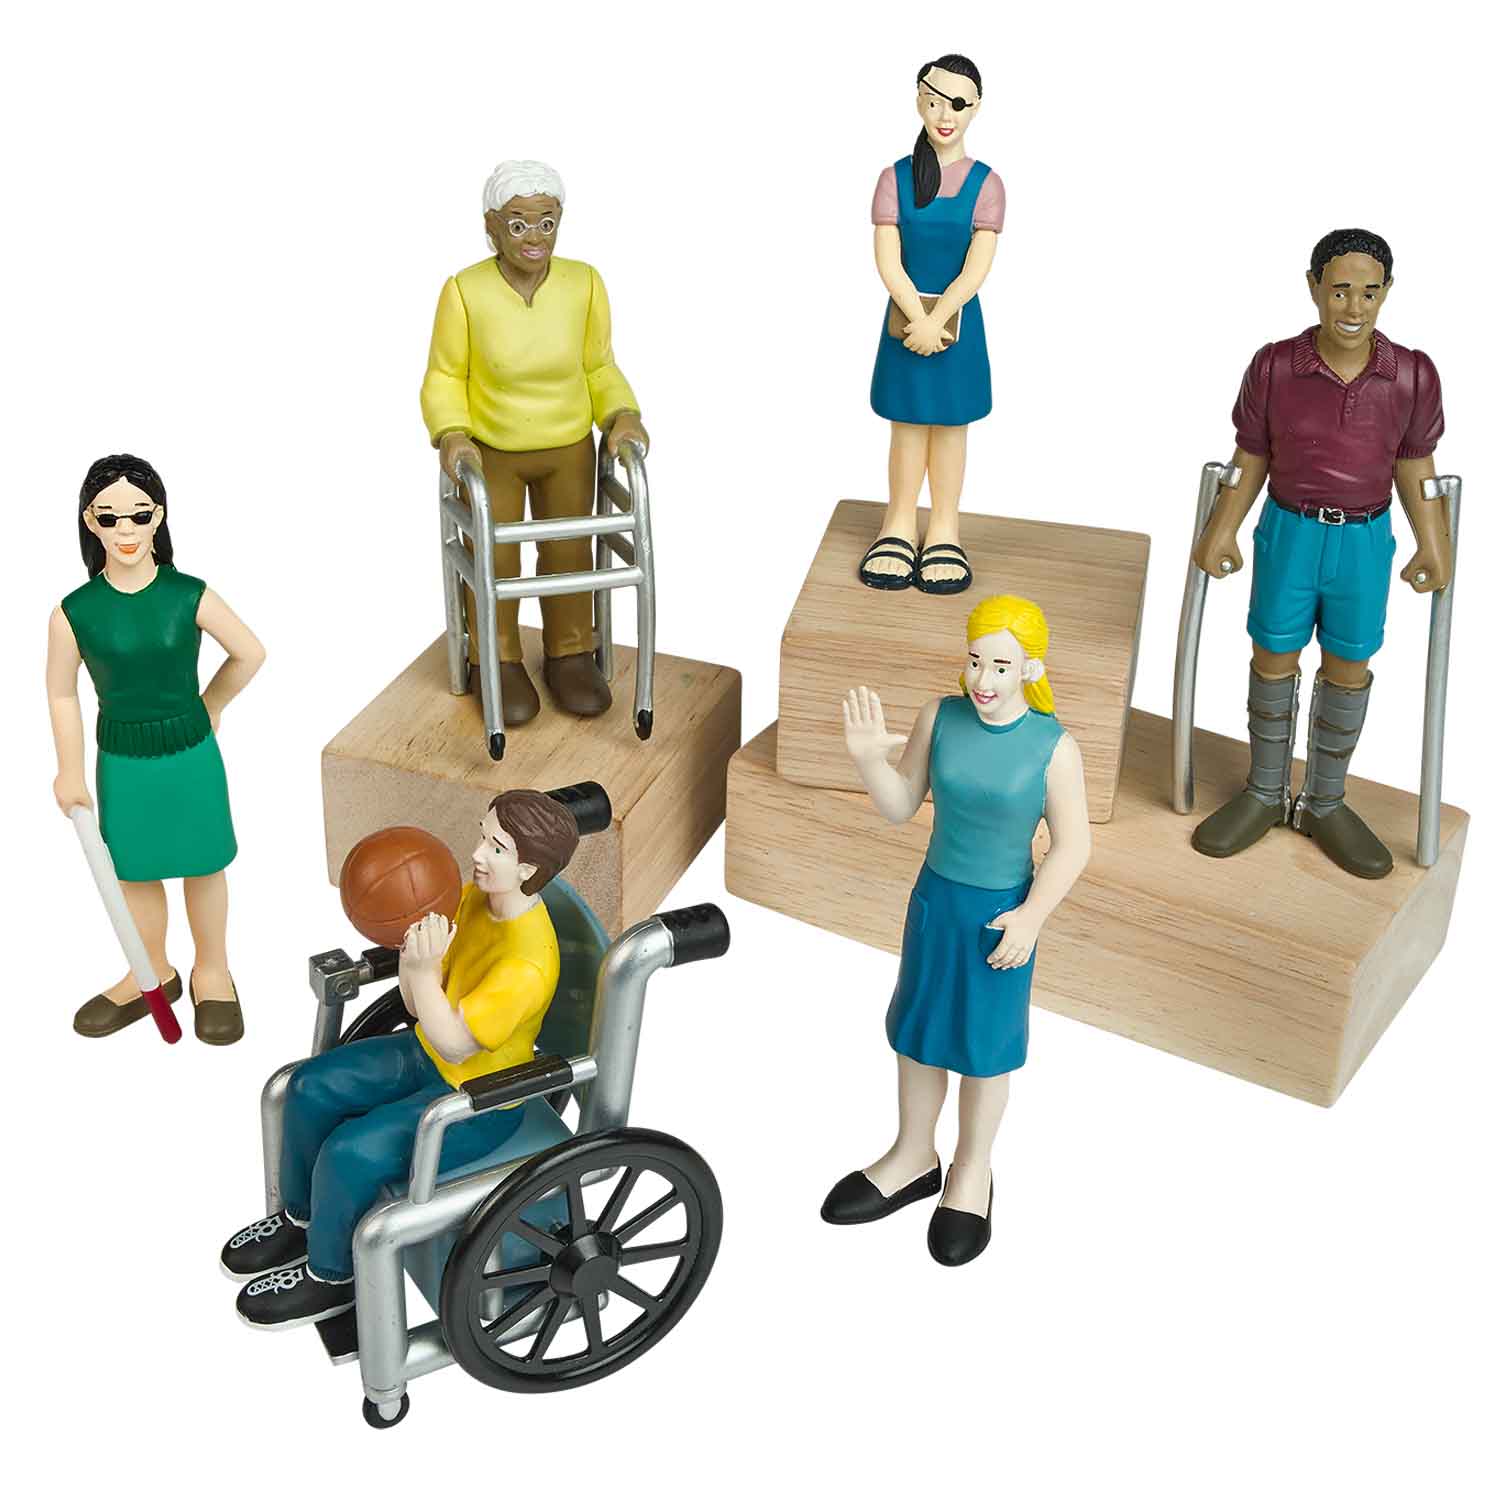 Friends with Diverse Abilities Figures